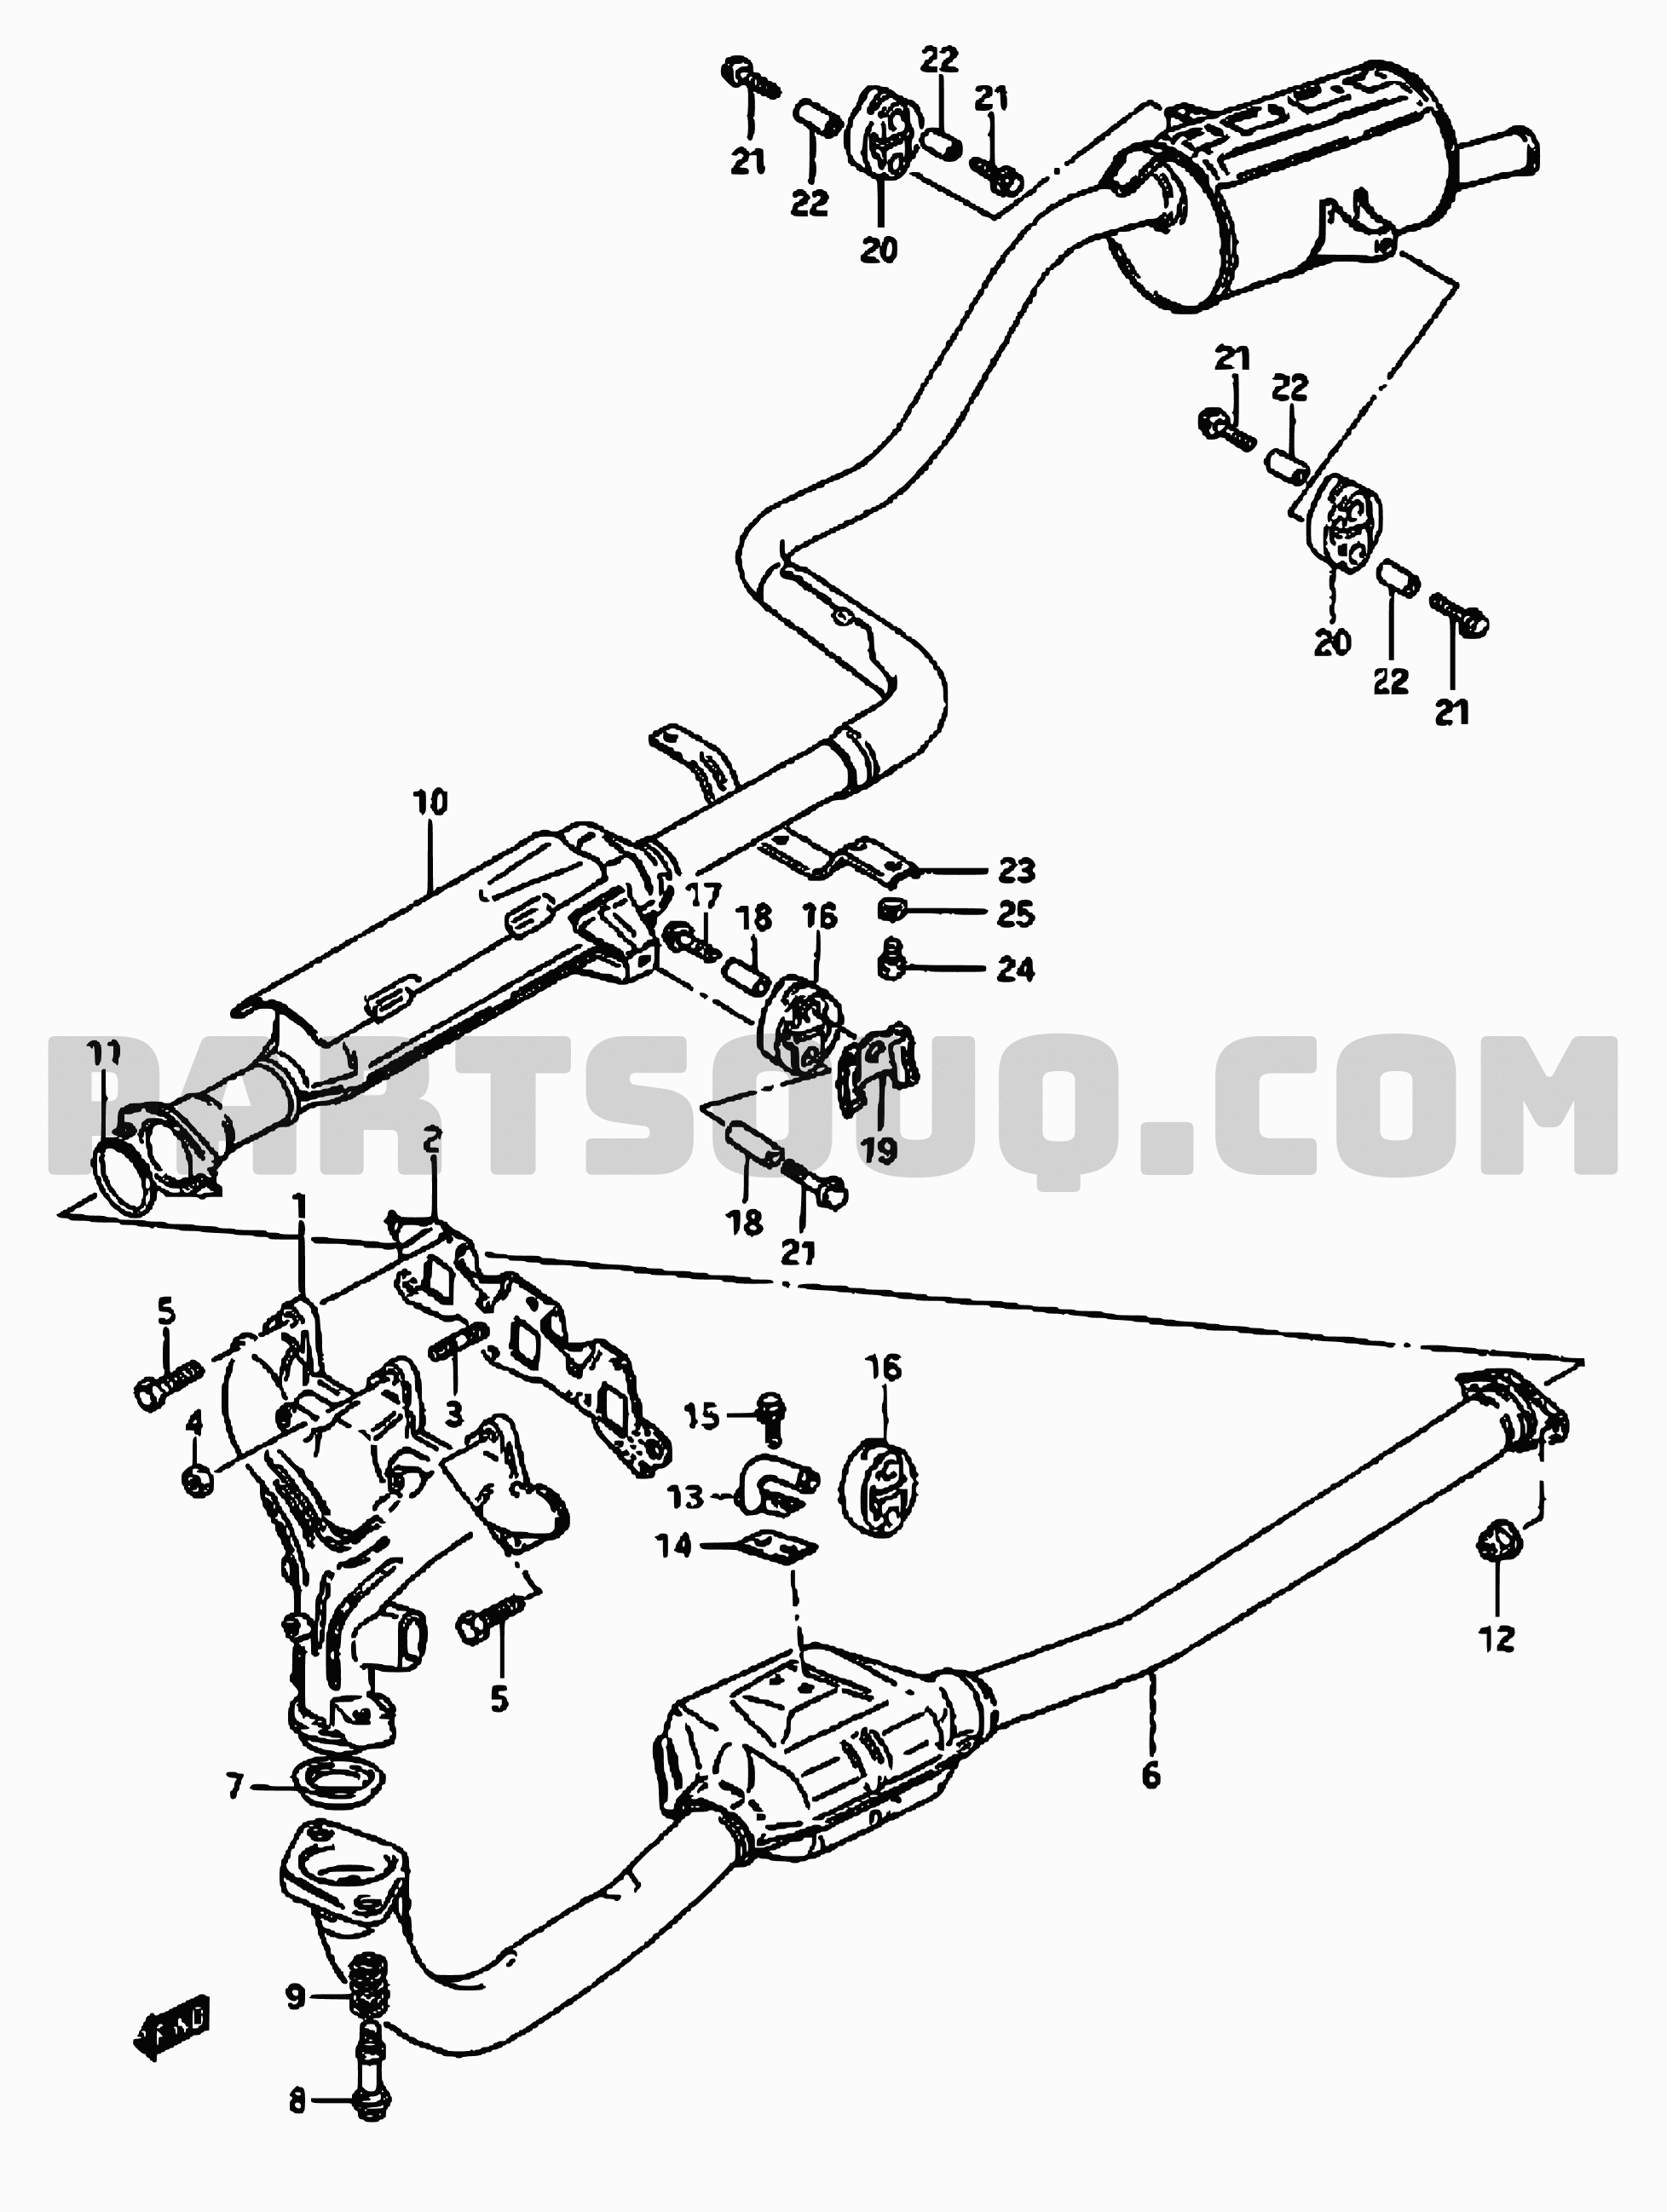 12 - EXHAUST SYSTEM